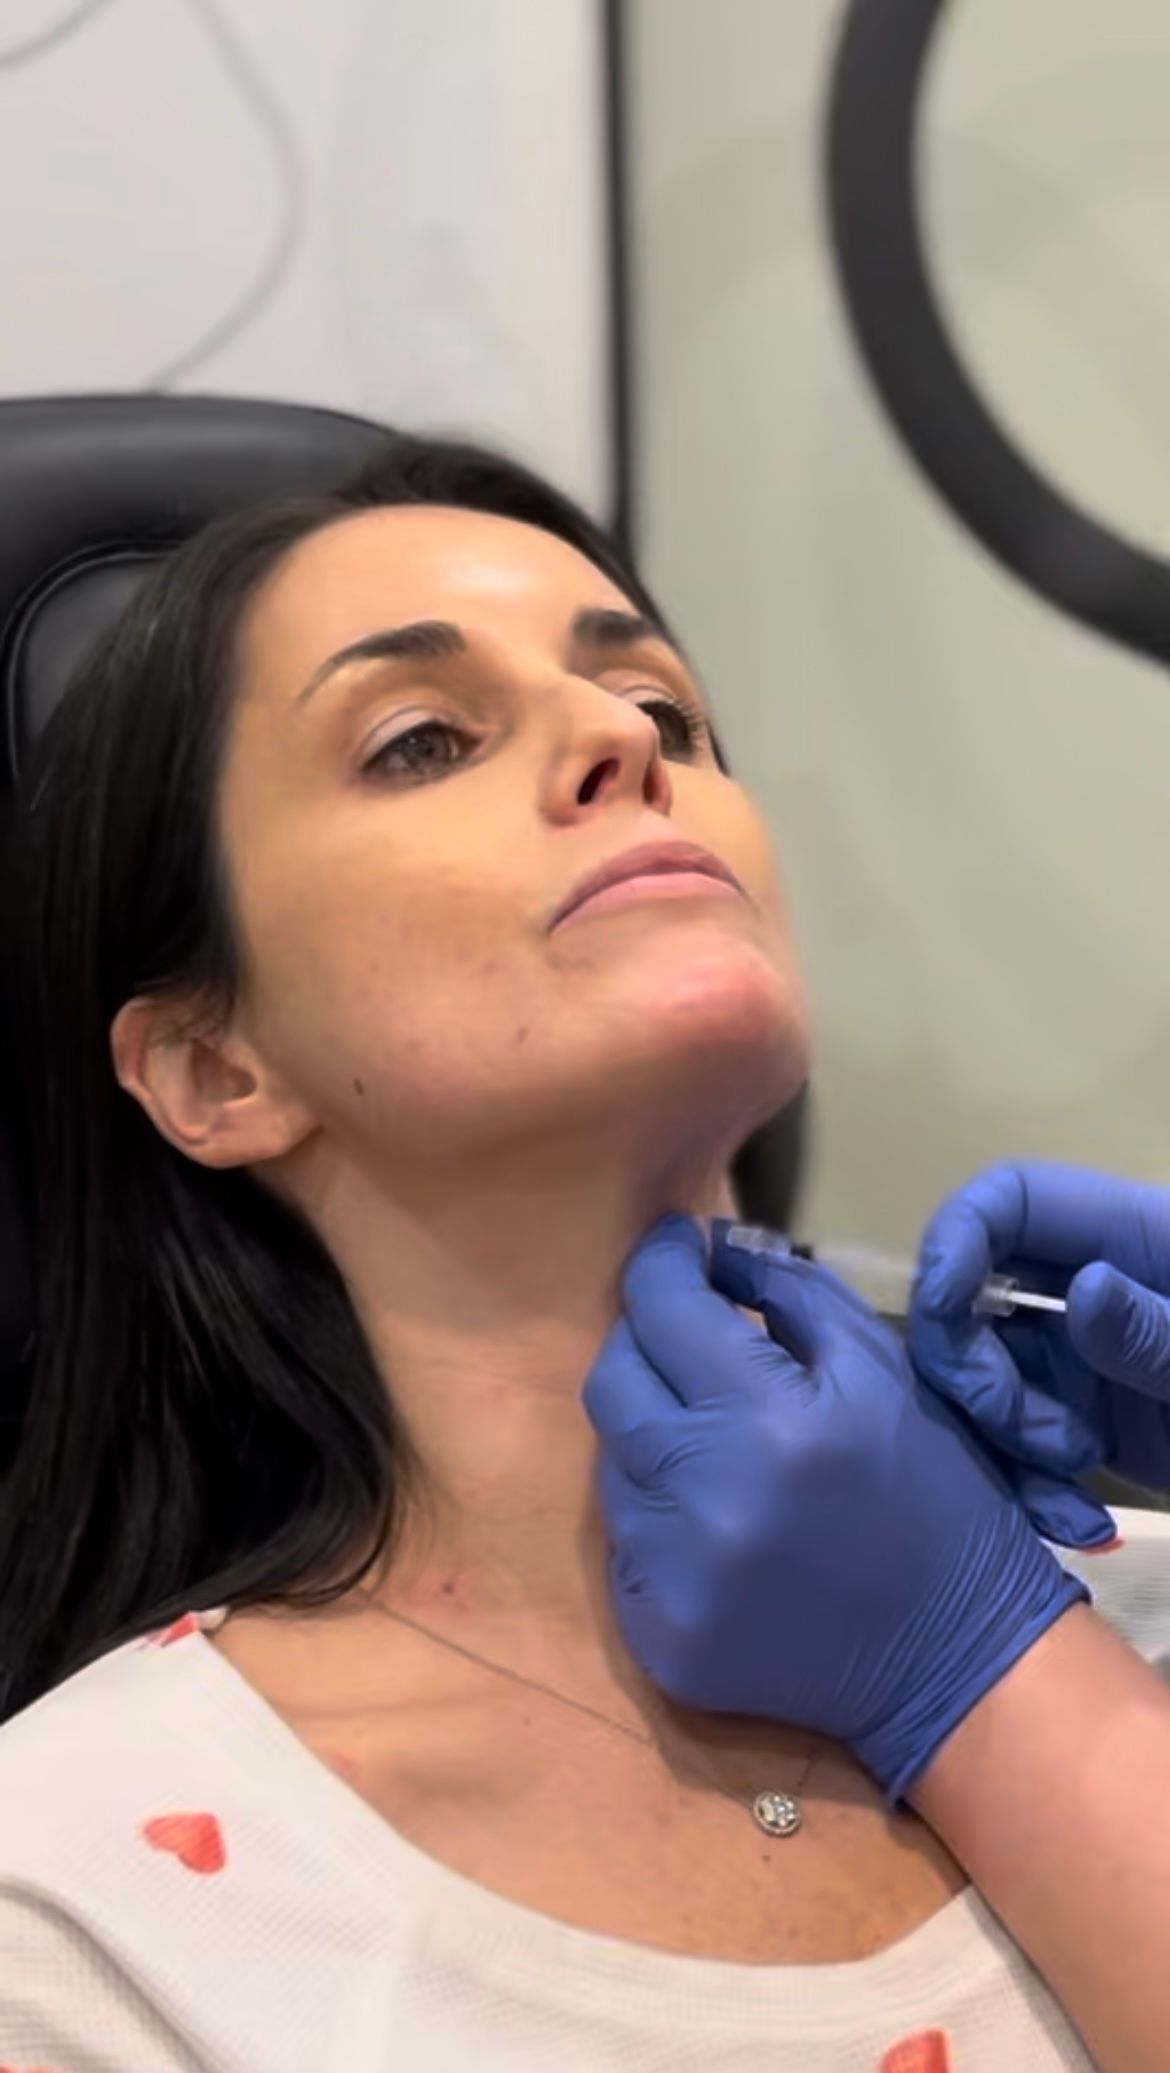 A woman is getting a botox injection in her neck.